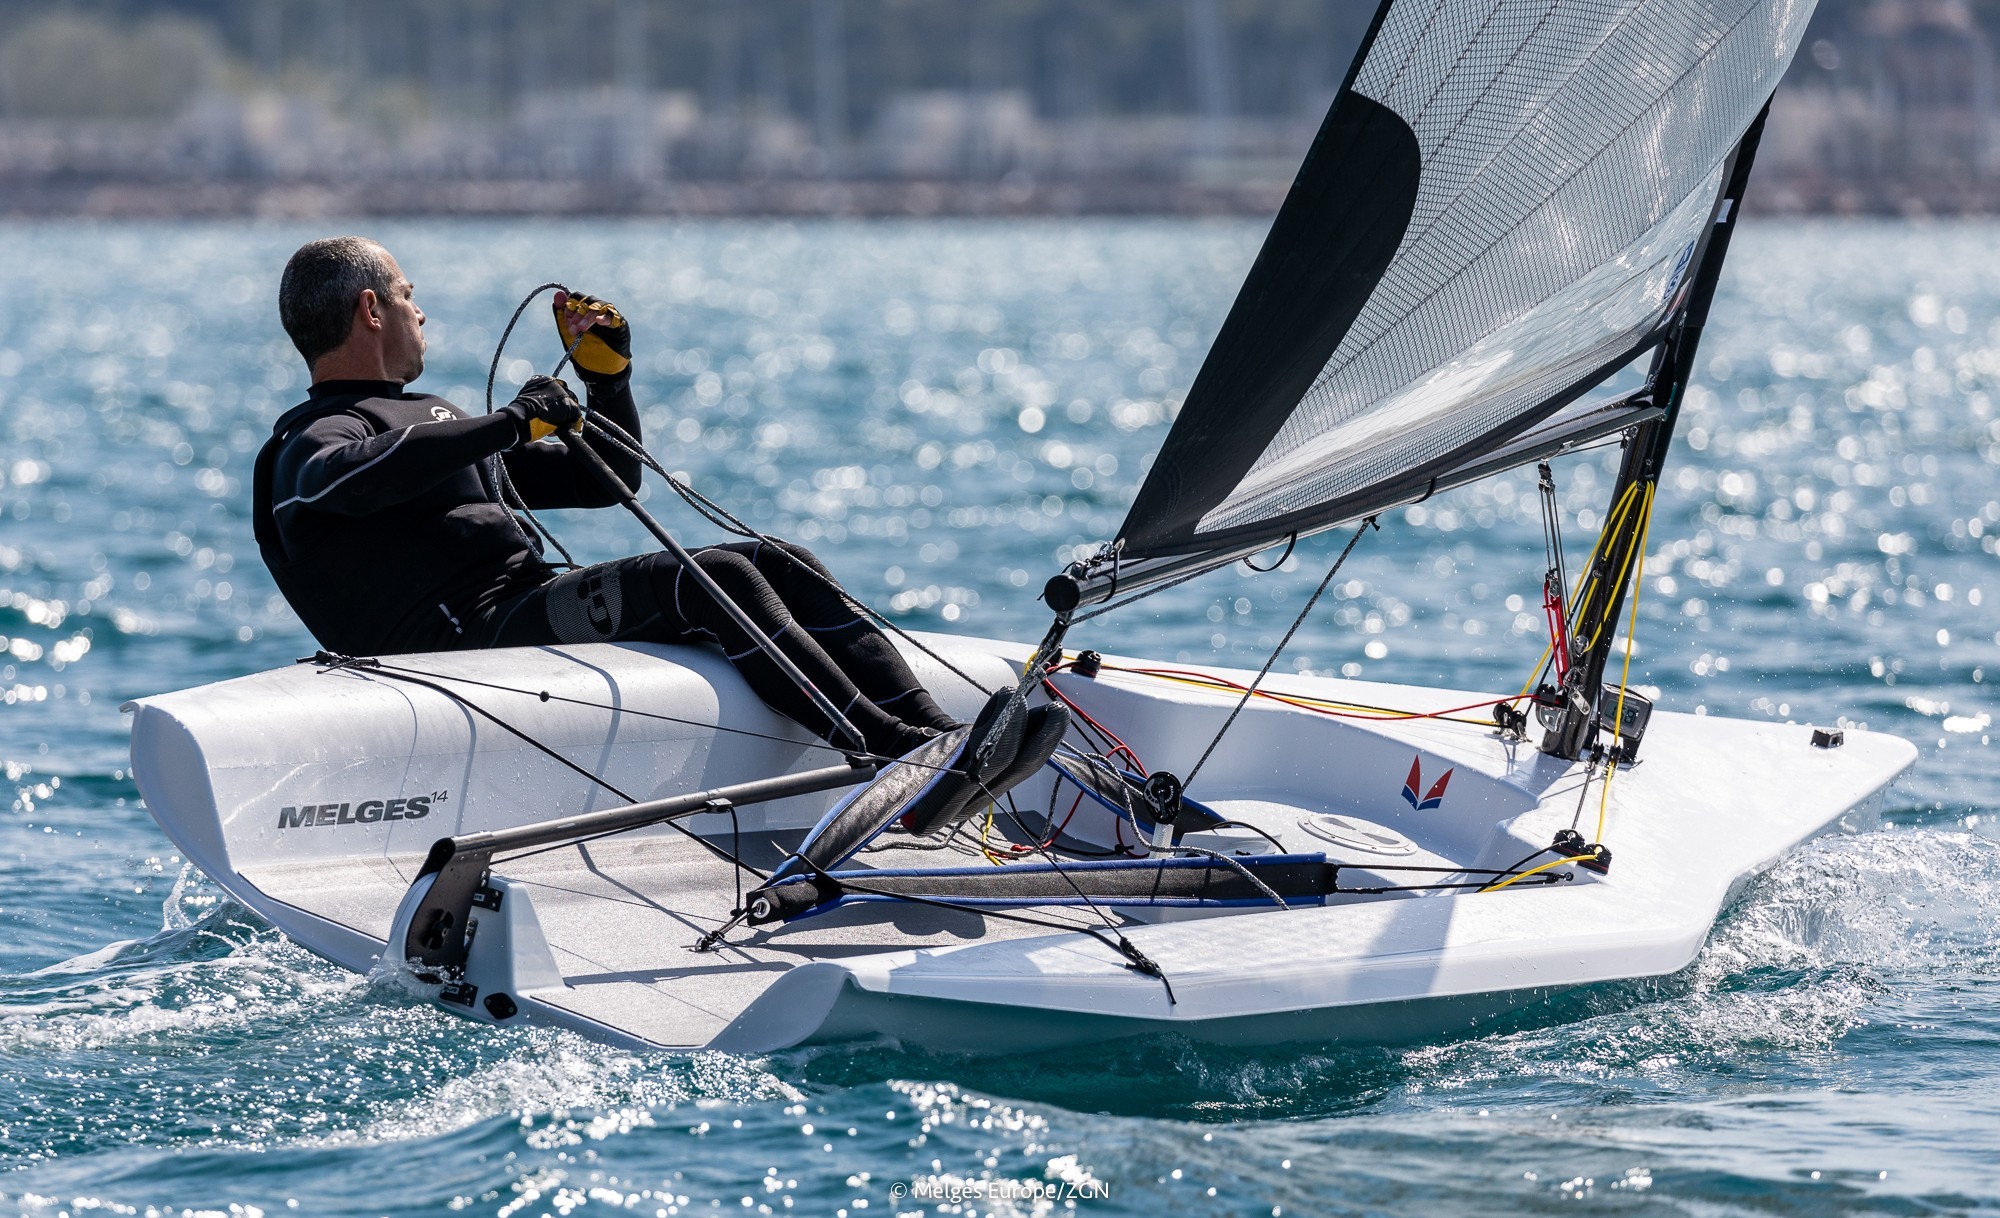 Melges World League, One design sailing back in 2022